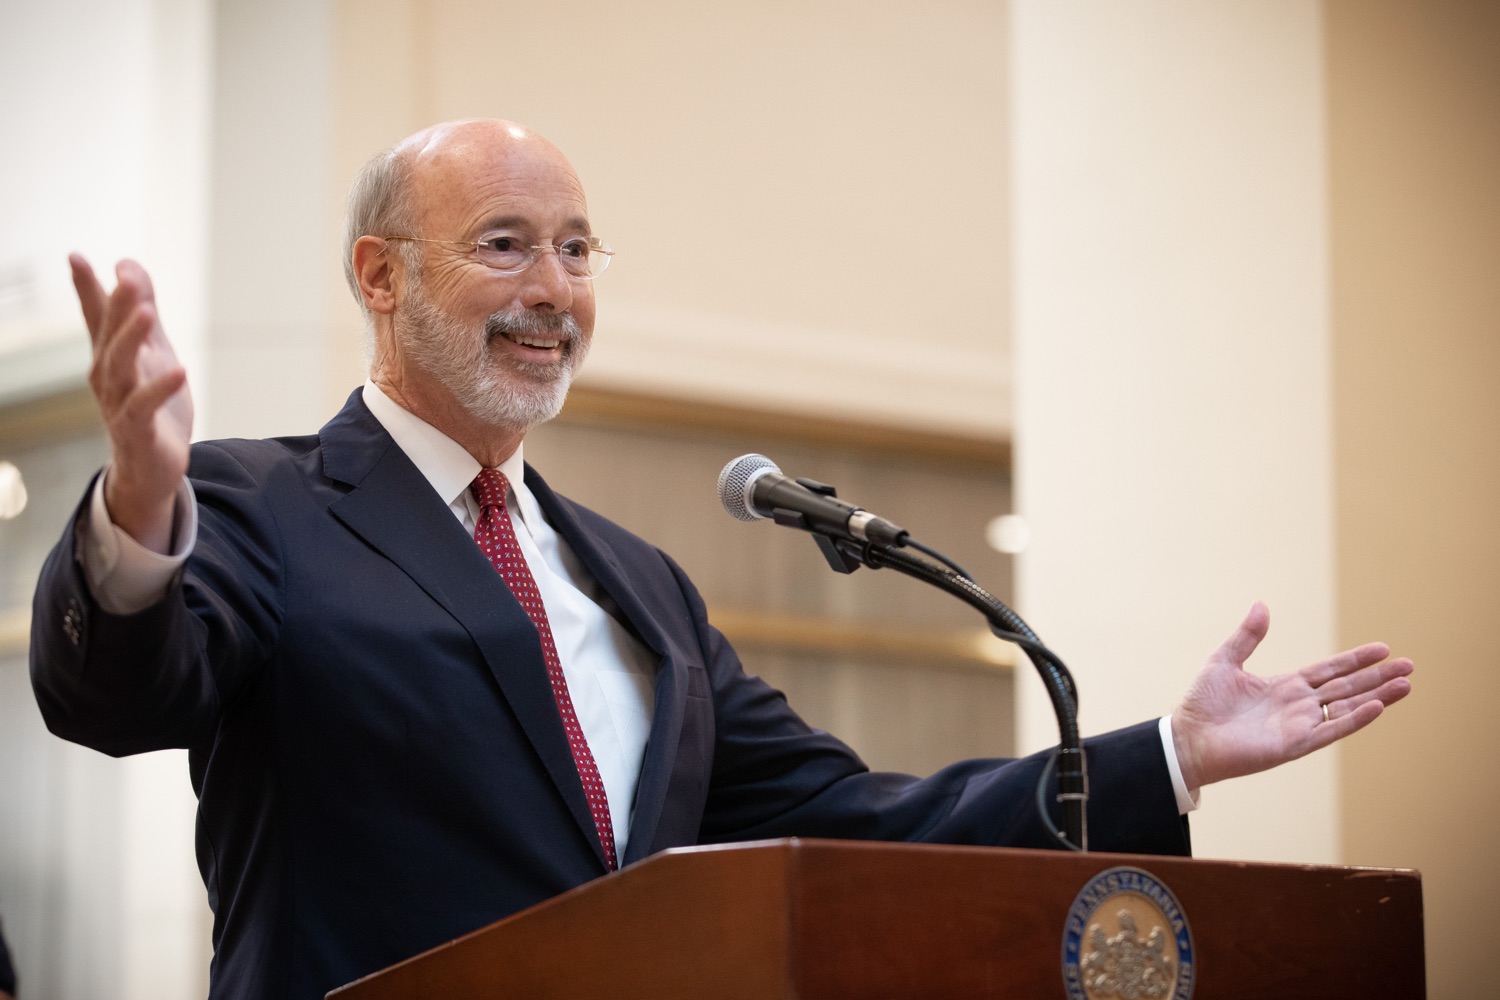 Pennsylvania Governor Tom Wolf speaks at the robotics demonstration. Celebrating the success of the PAsmart workforce development program to create educational opportunities at schools across the commonwealth, Governor Tom Wolf welcomed more than 50 students from the Pennsylvania Rural Robotics Initiative to the Capitol today. The students from nine western Pennsylvania school districts showcased their skills in coding, robotics and drone technology. The Wolf administration awarded the initiative a $299,000 PAsmart Advancing Grant earlier this year. Harrisburg, PA  Tuesday, November 12, 2019<br><a href="https://filesource.amperwave.net/commonwealthofpa/photo/17587_gov_pasmart_rural_robotics_dz_001.jpg" target="_blank">⇣ Download Photo</a>